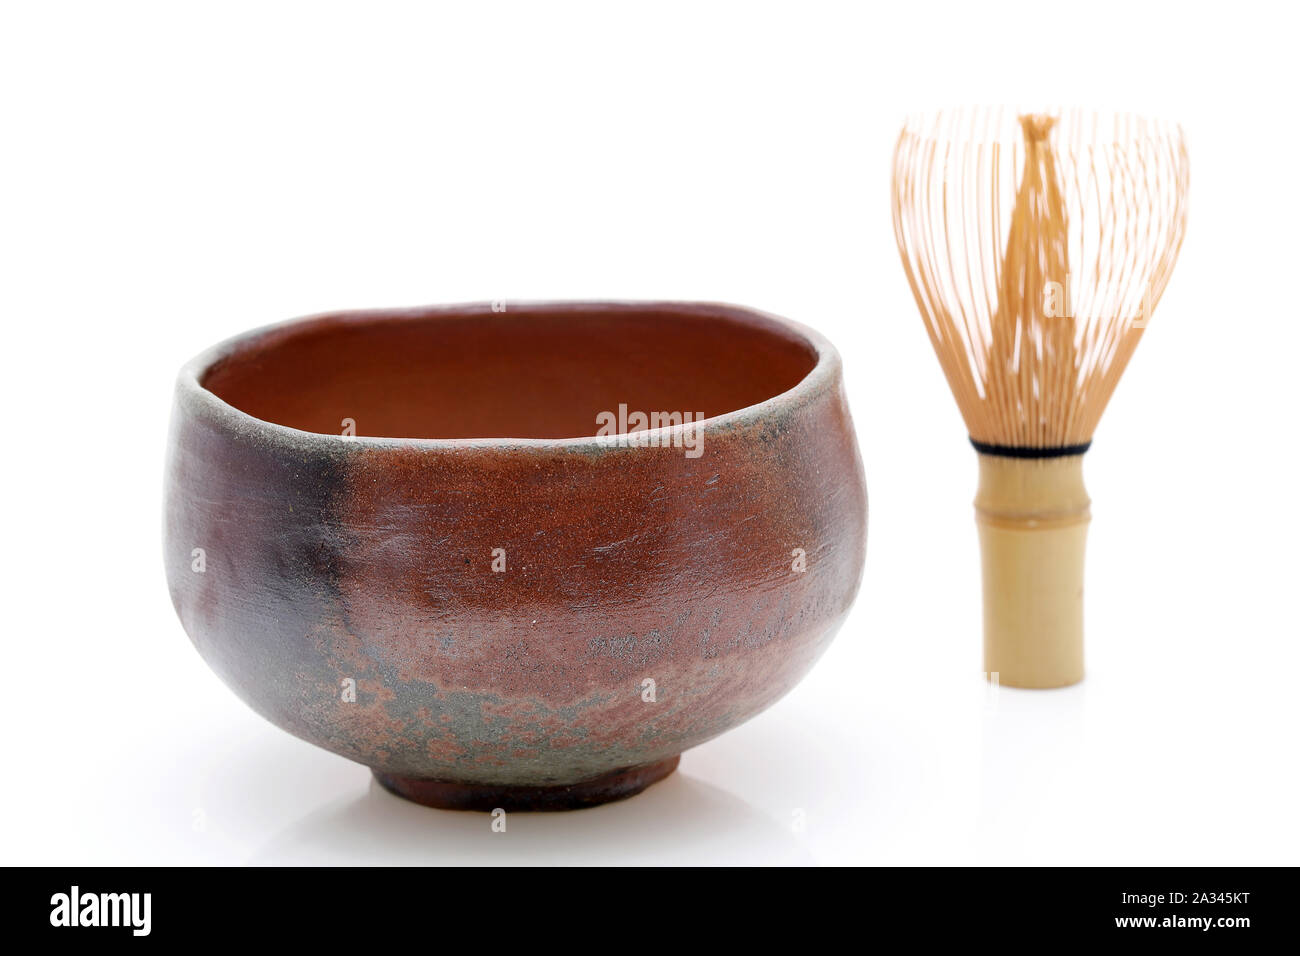 Tea bowl with tea whisk used in Japanese matcha tea ceremony on white hackgrond Stock Photo